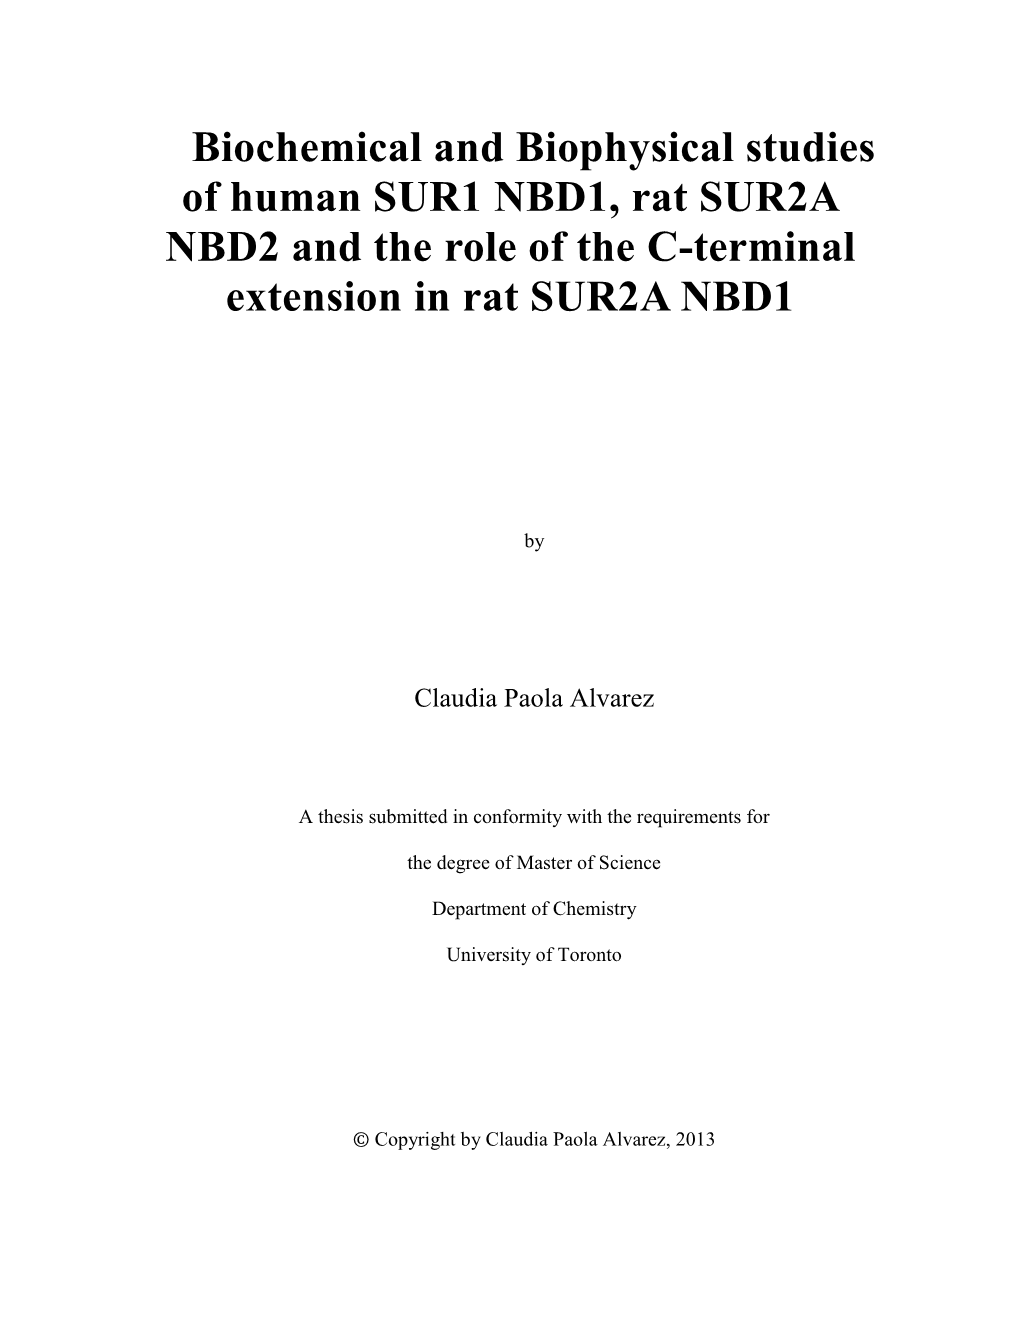 Biochemical and Biophysical Studies of Human SUR1 NBD1, Rat SUR2A NBD2 and the Role of the C-Terminal Extension in Rat SUR2A NBD1